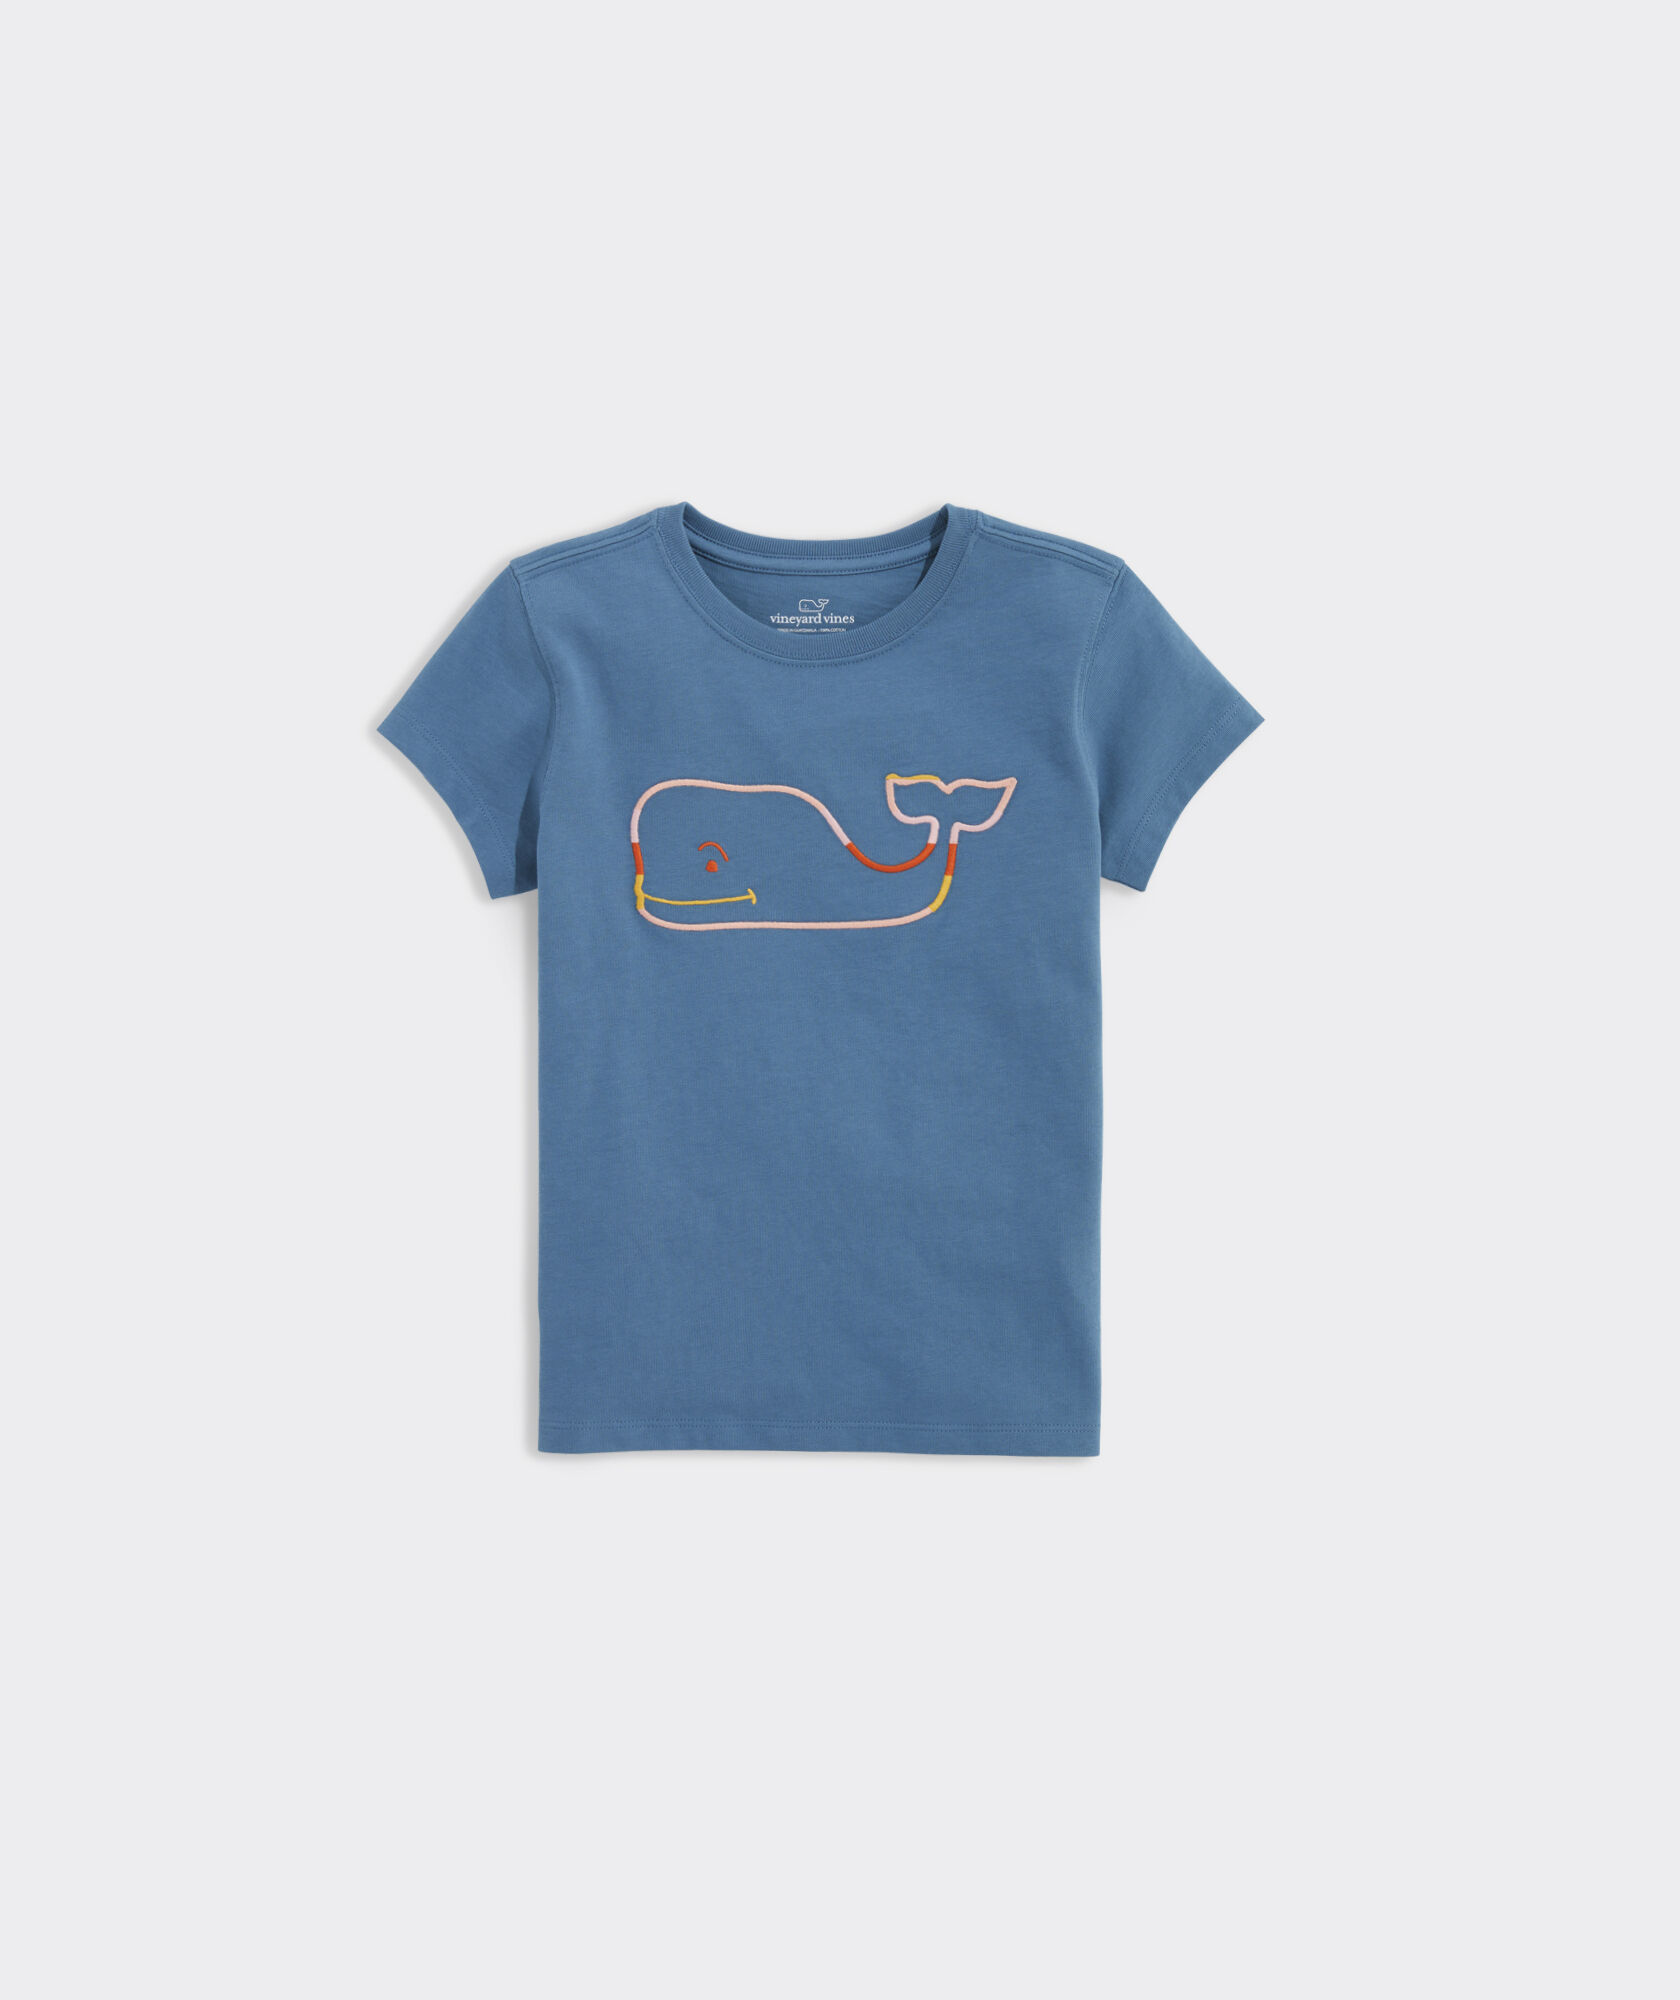 Girls' Whale Embroidery Short-Sleeve Tee